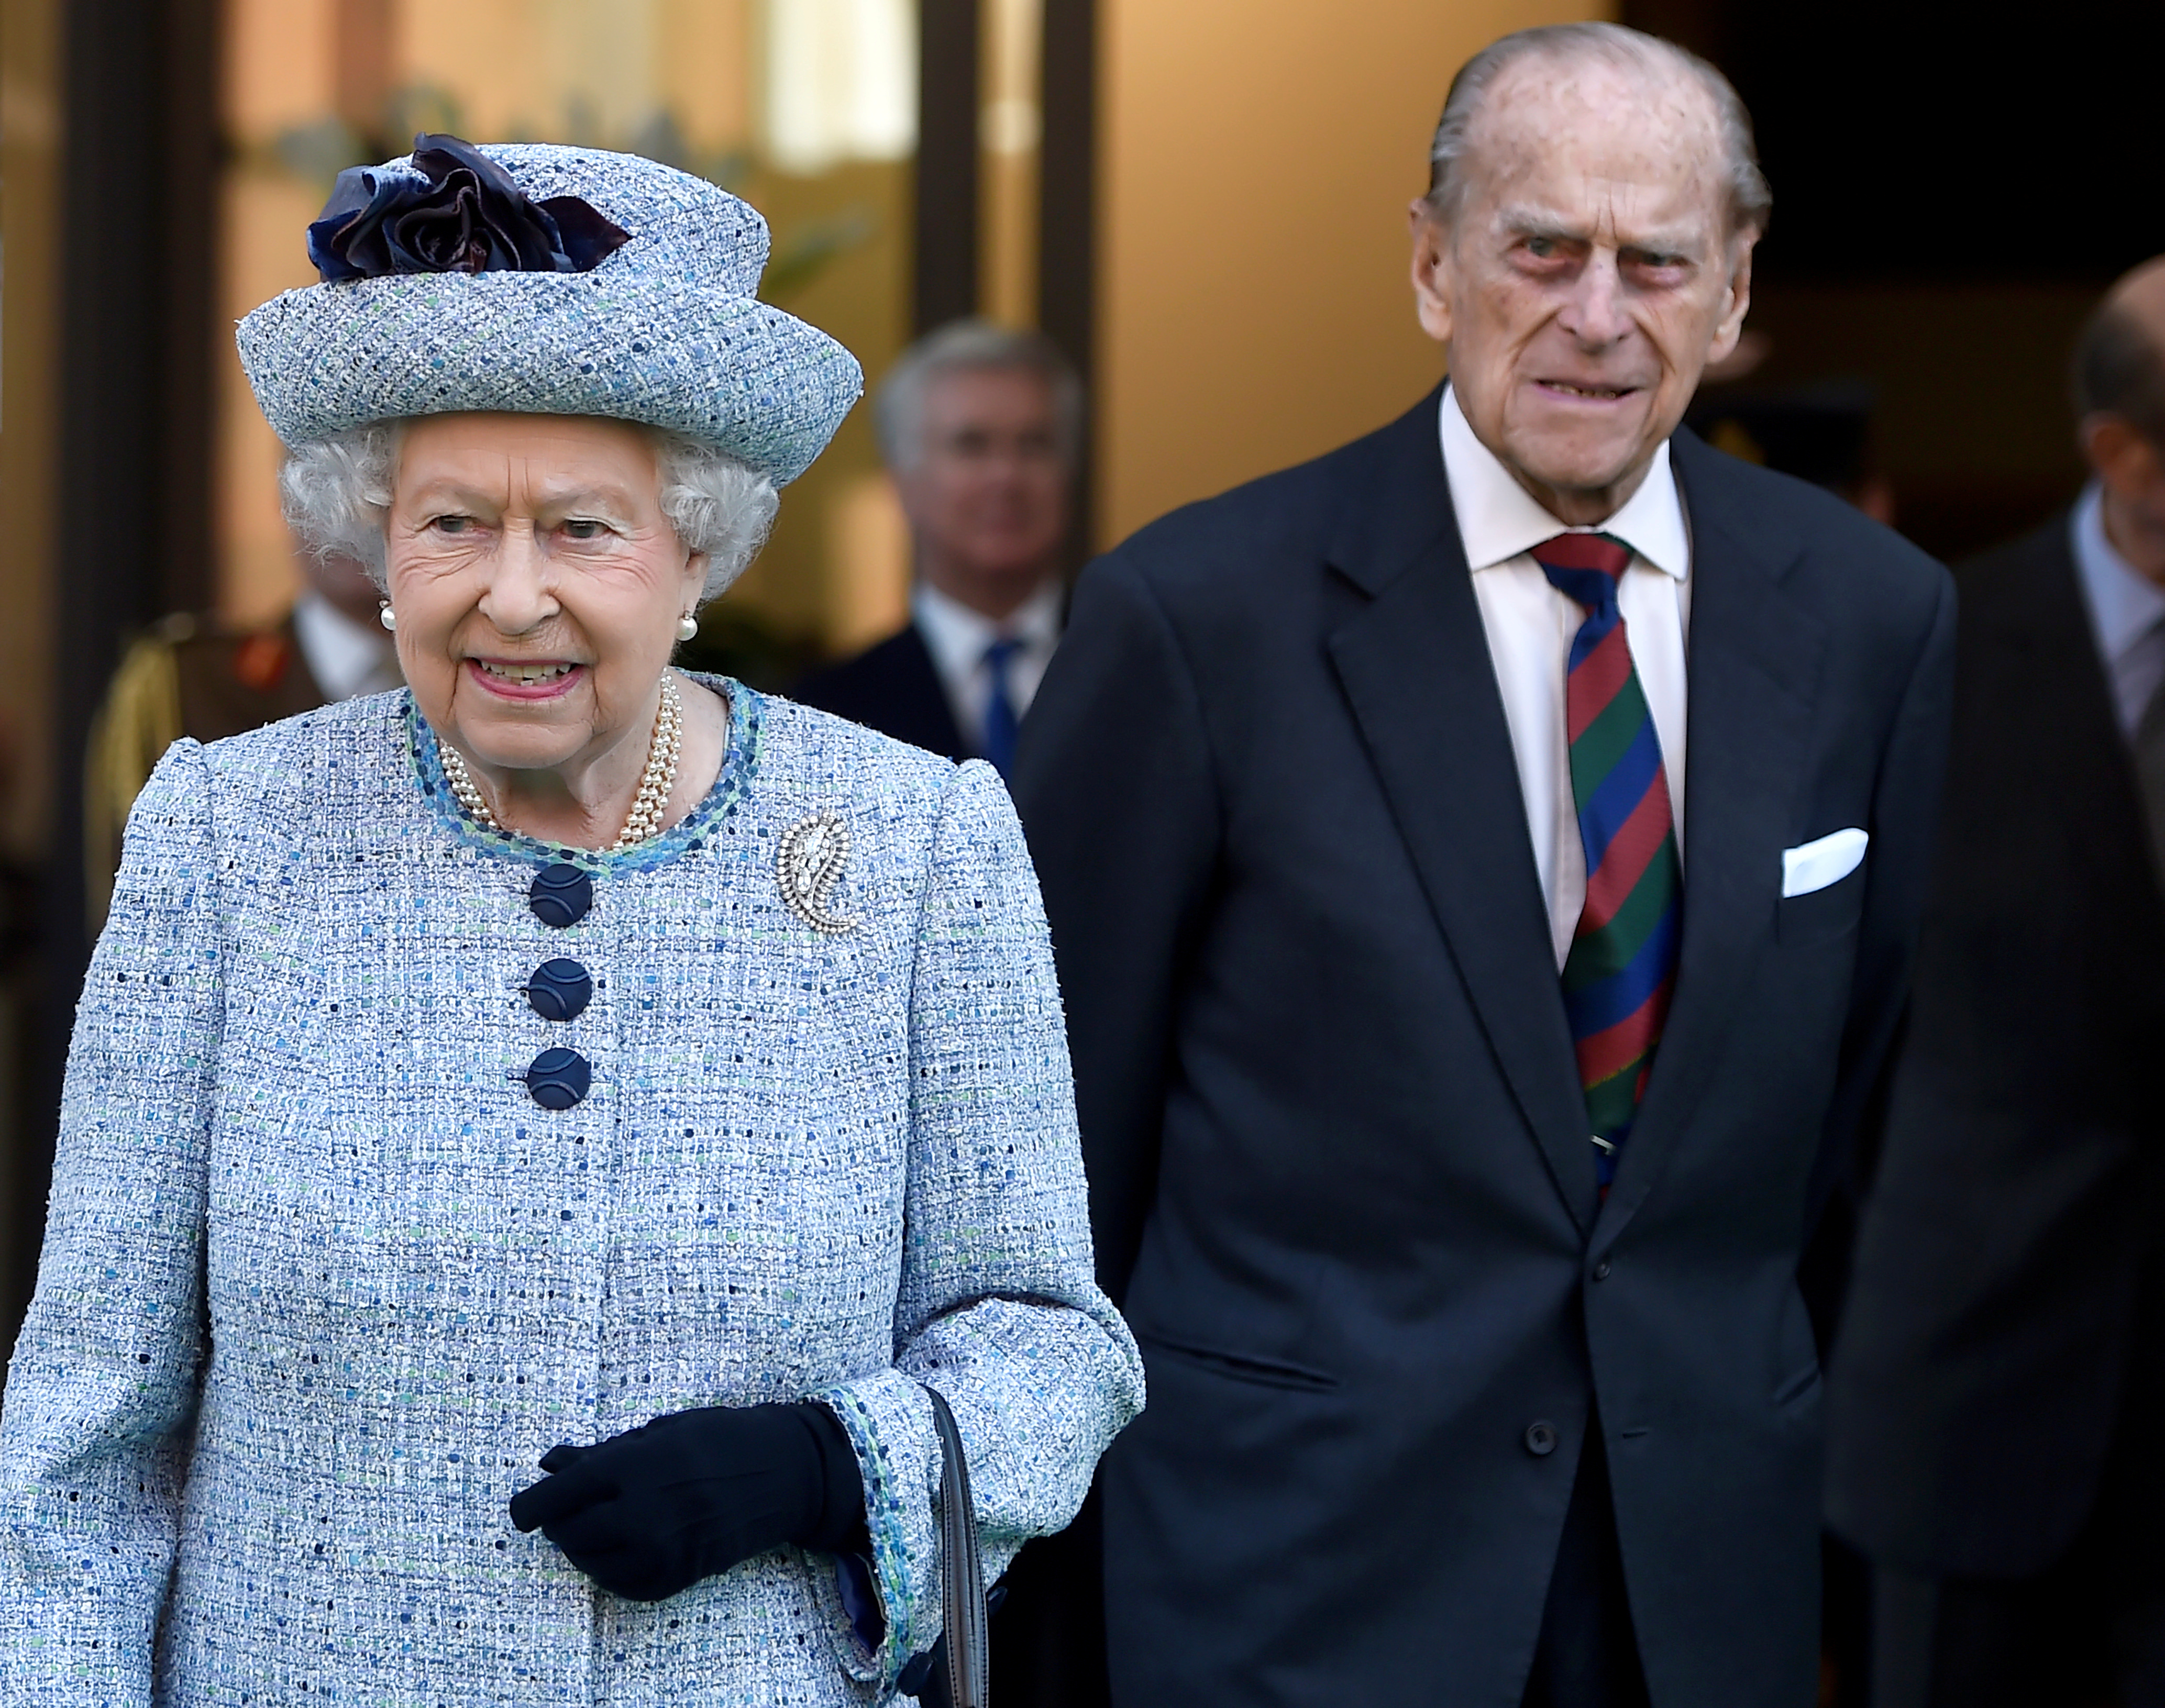 Britain's Queen Elizabeth II and Prince Philip, the Duke of Edinburgh leave the National Army Museum in London